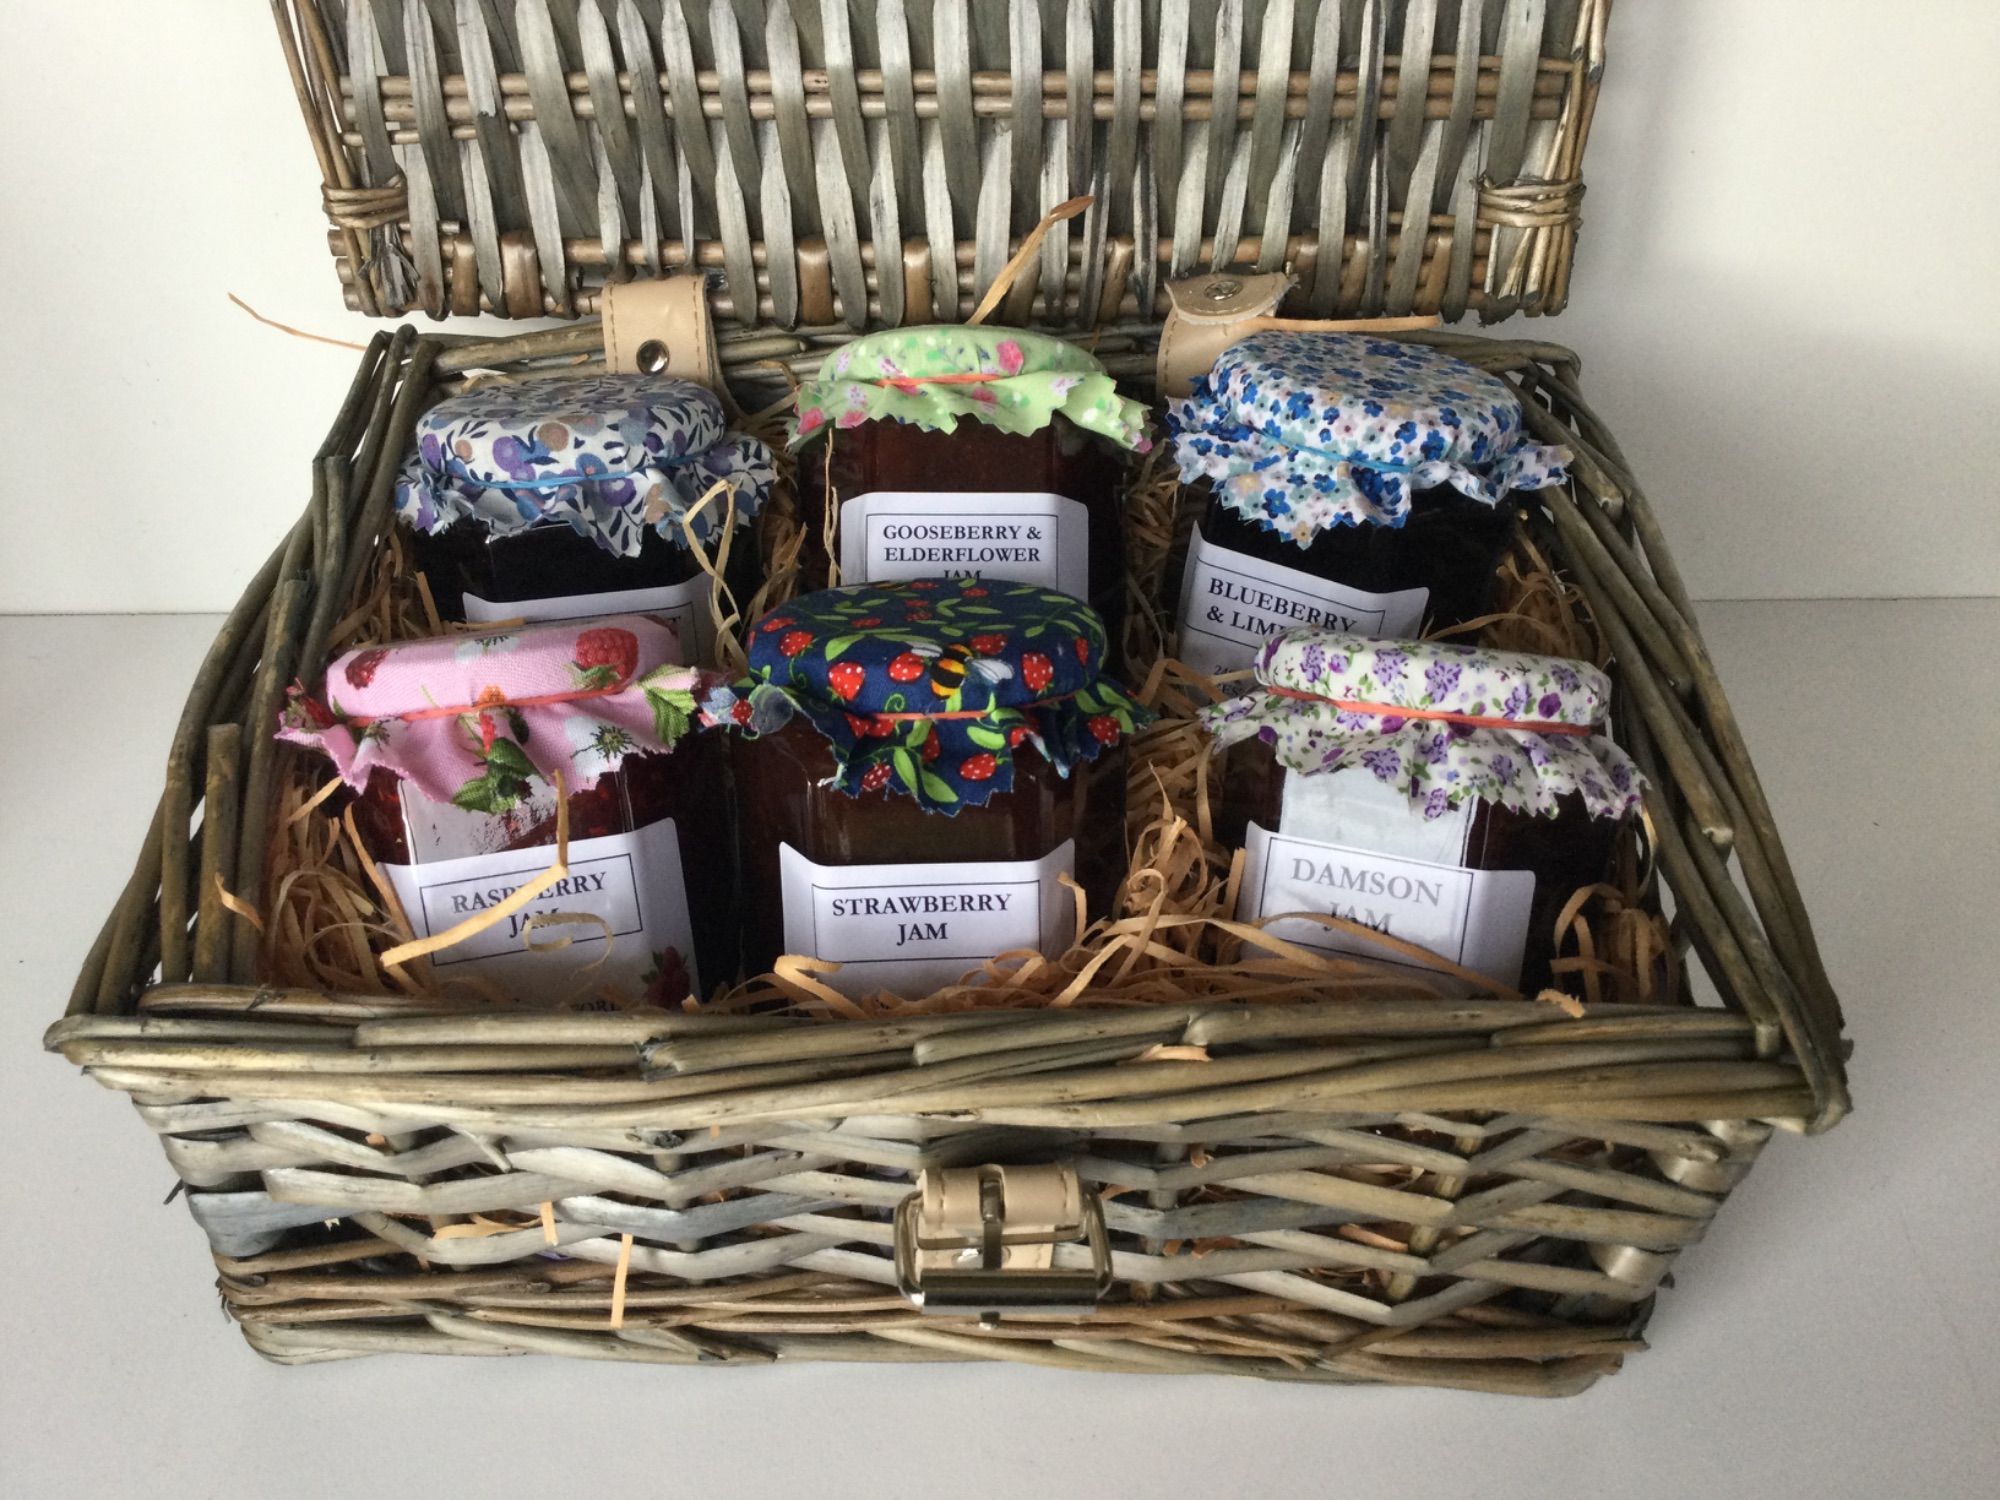 A wicker hamper containing six different jams